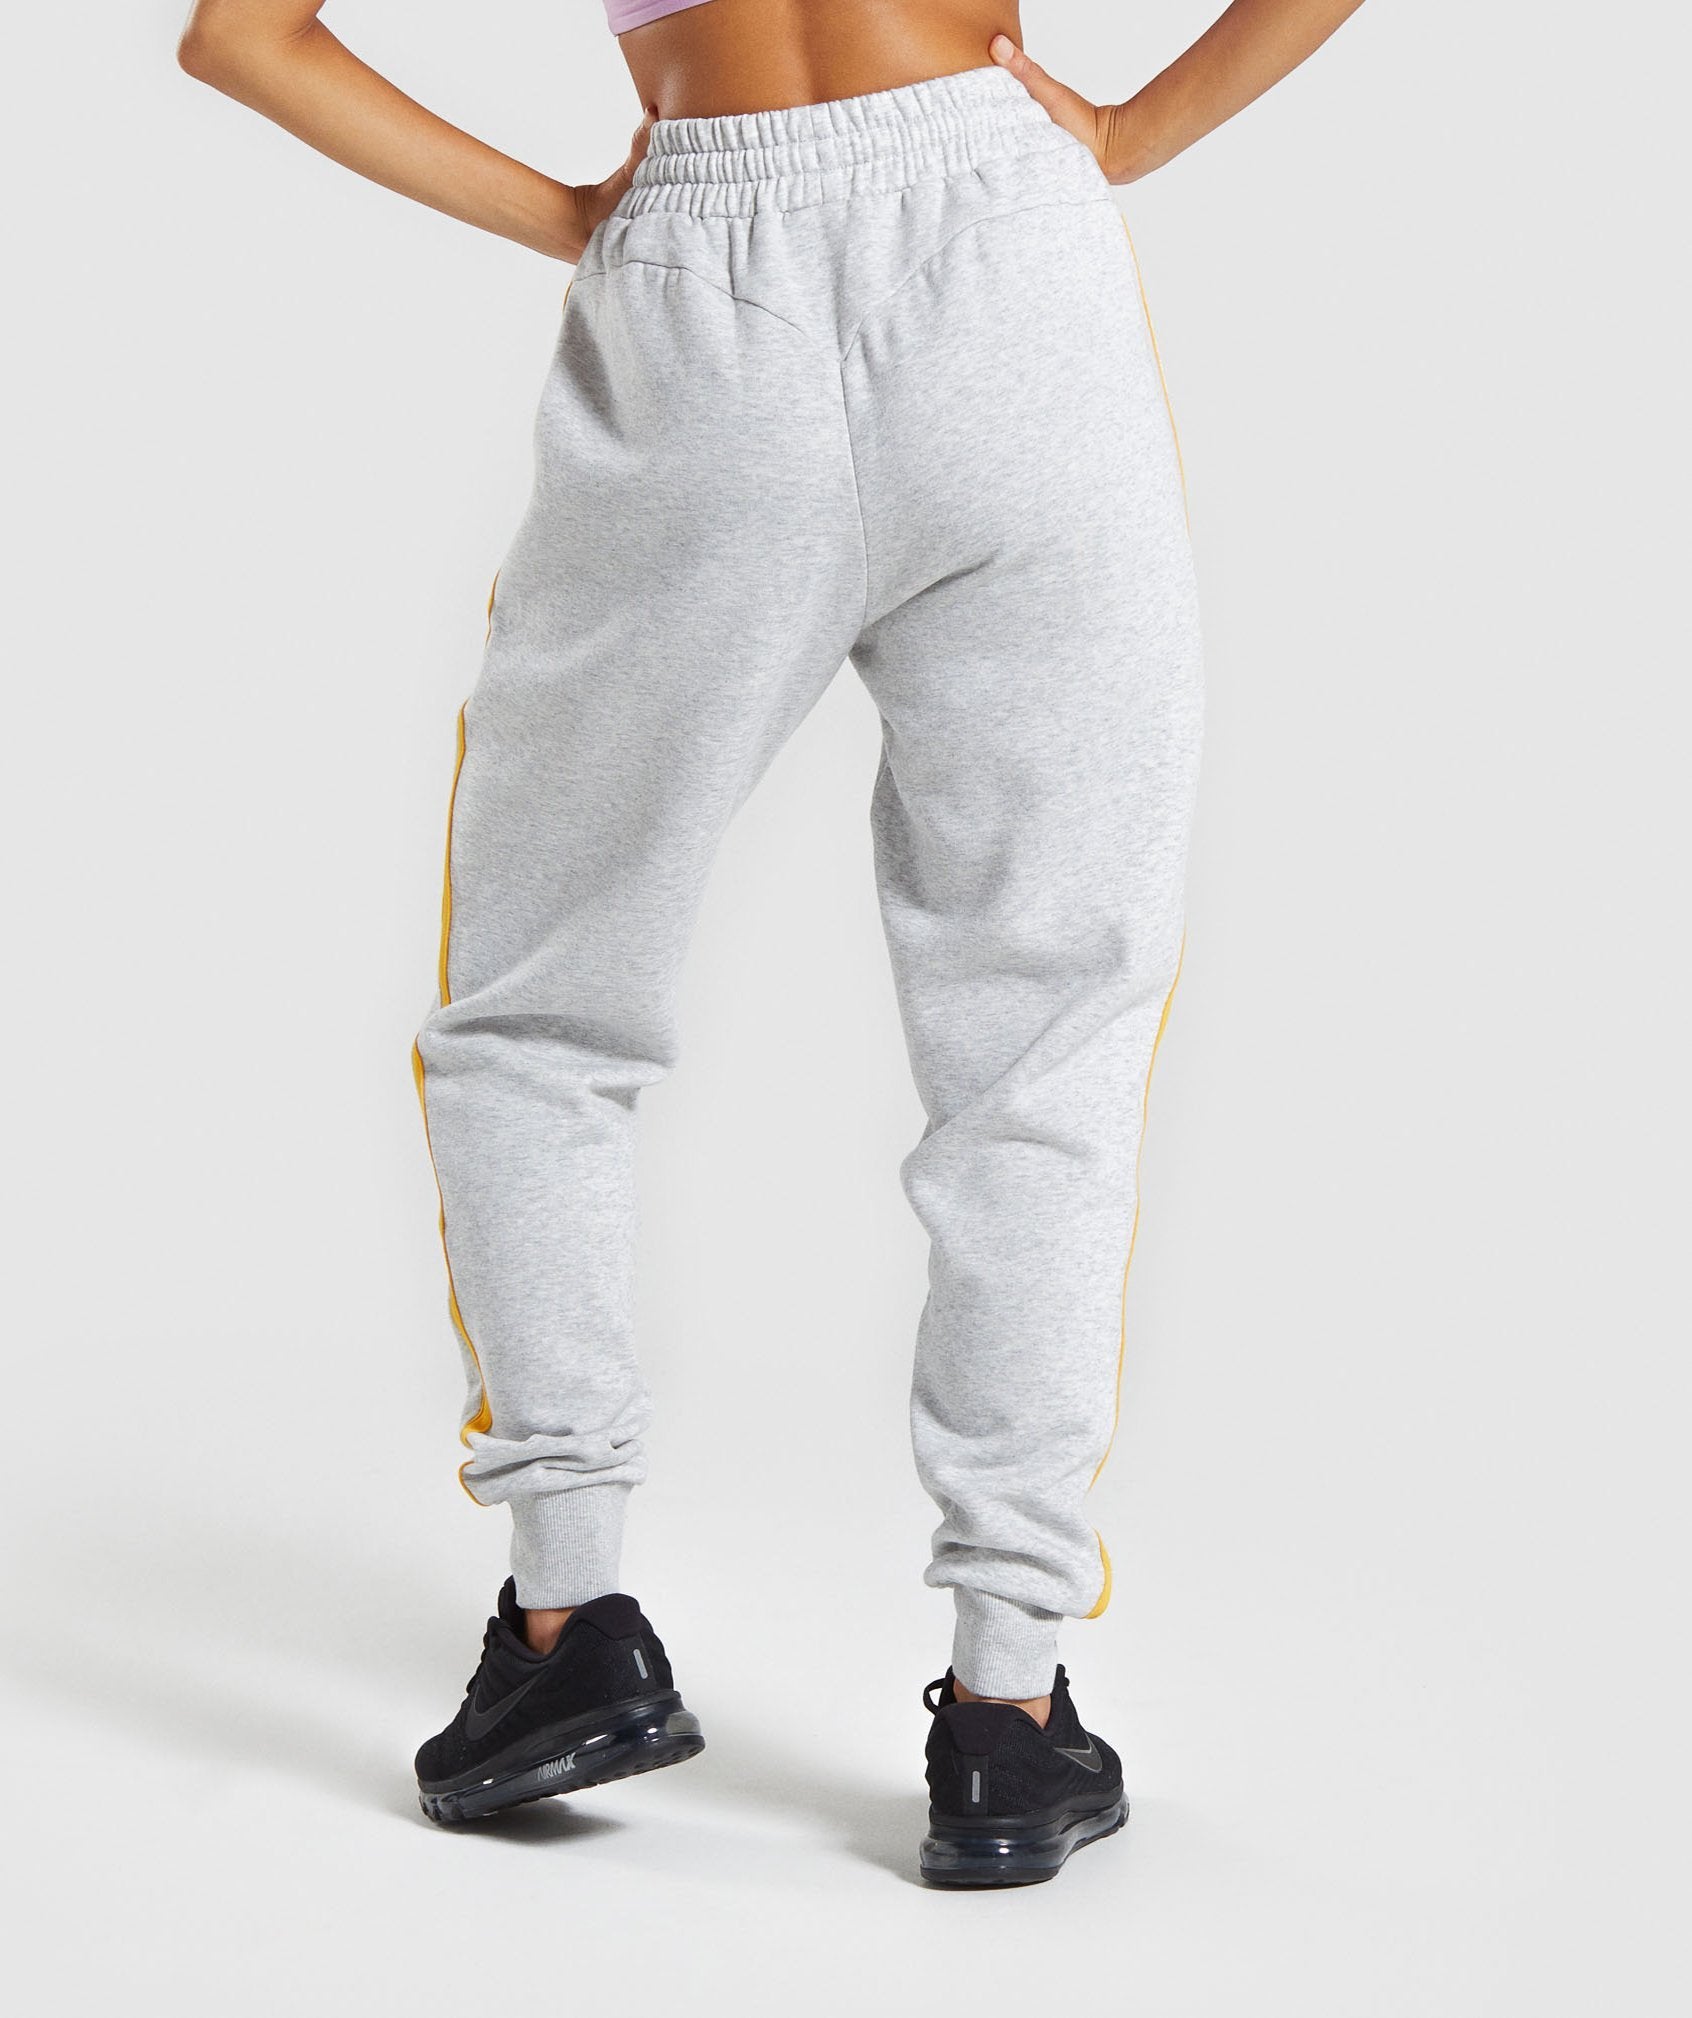 Legacy Fitness Joggers in Light Grey - view 2